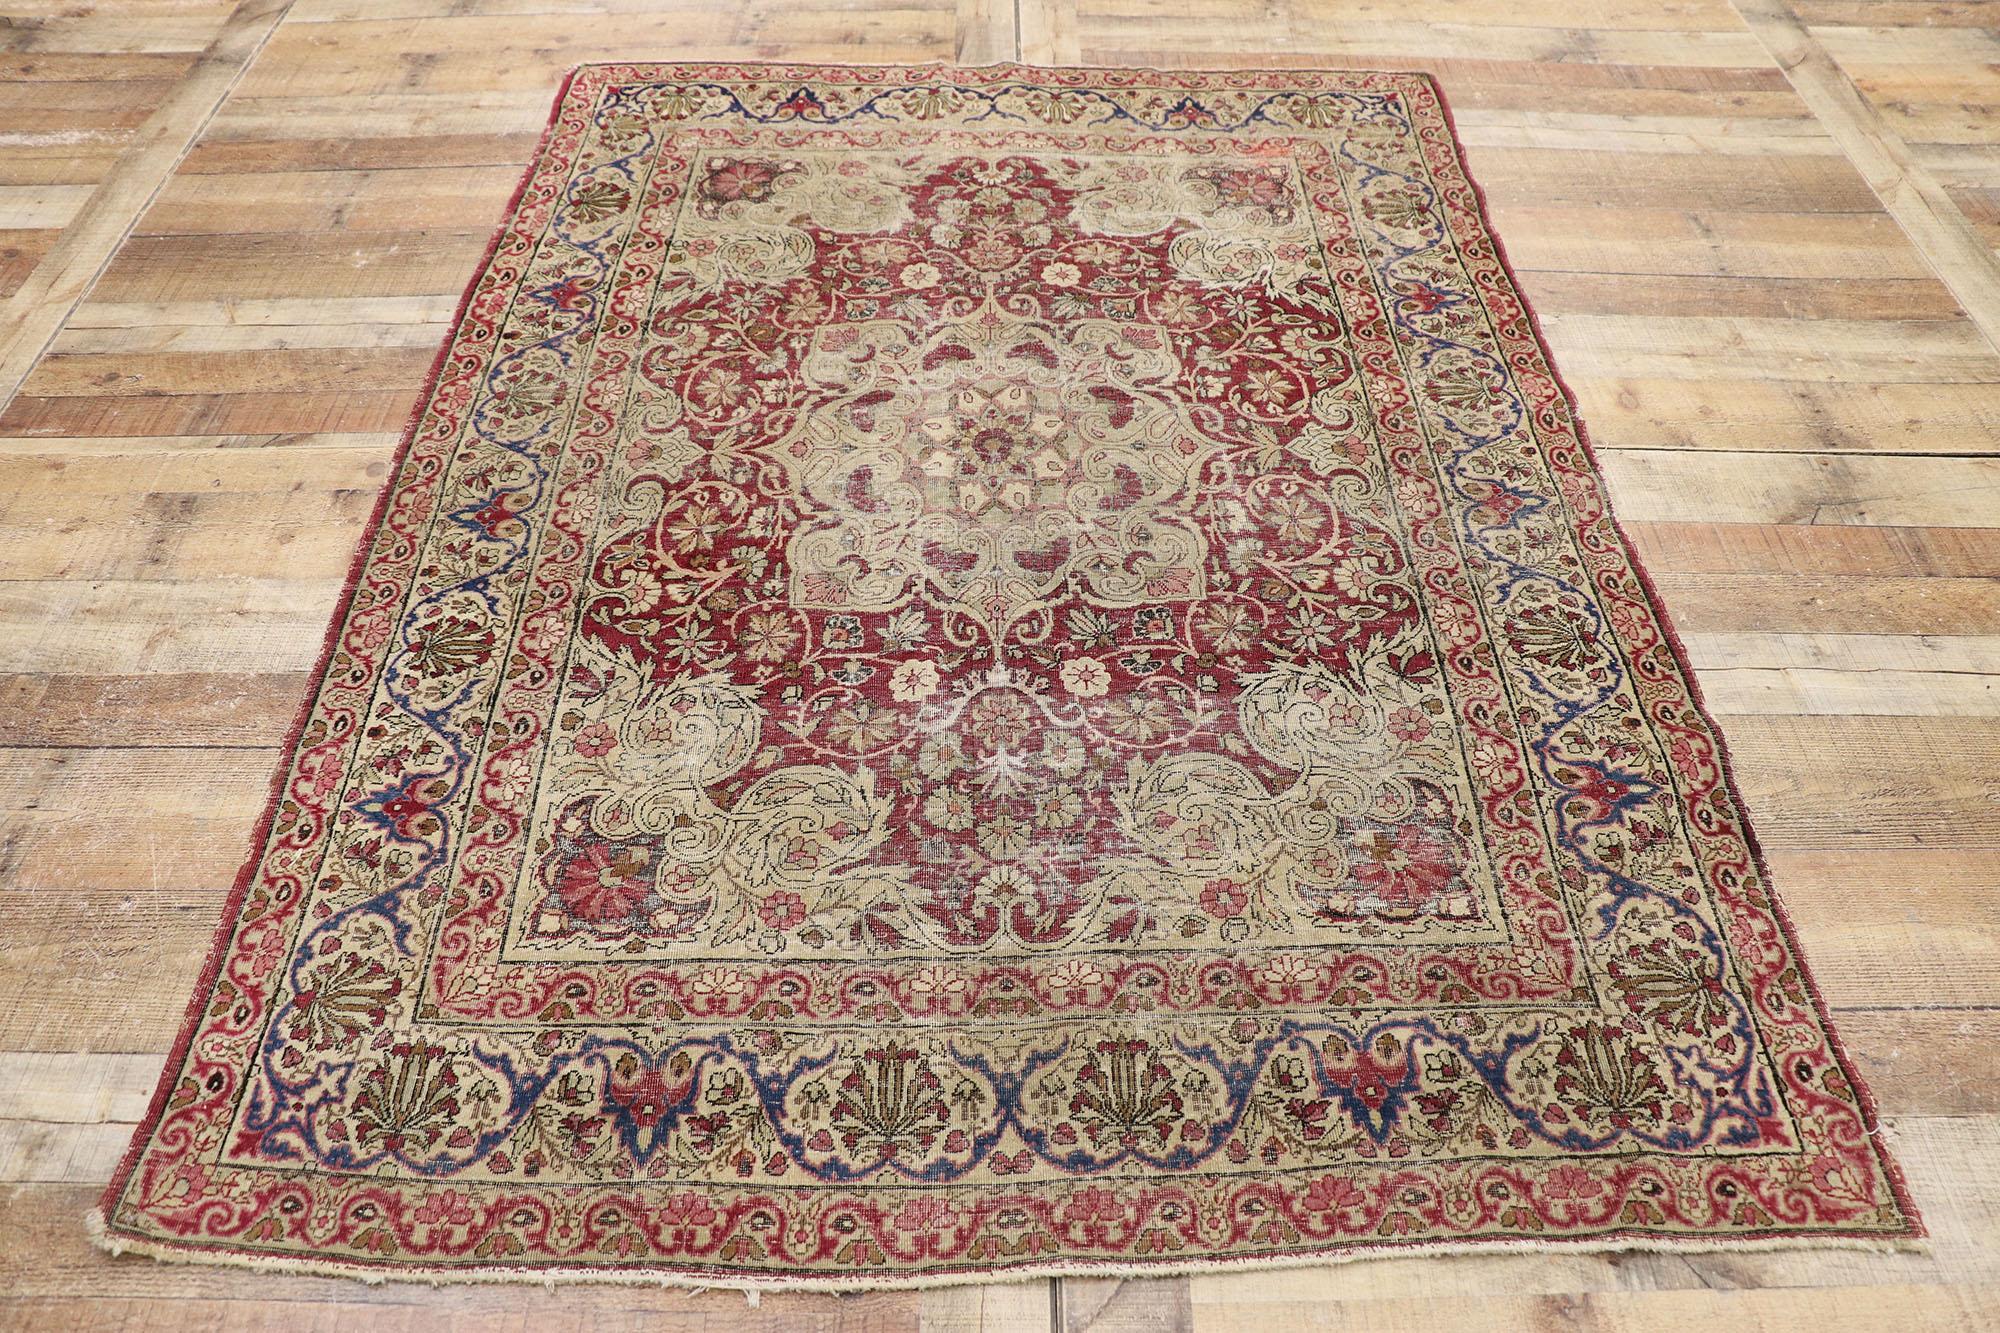 Wool Distressed Antique Persian Kerman Rug with Rustic Old World Victorian Style For Sale